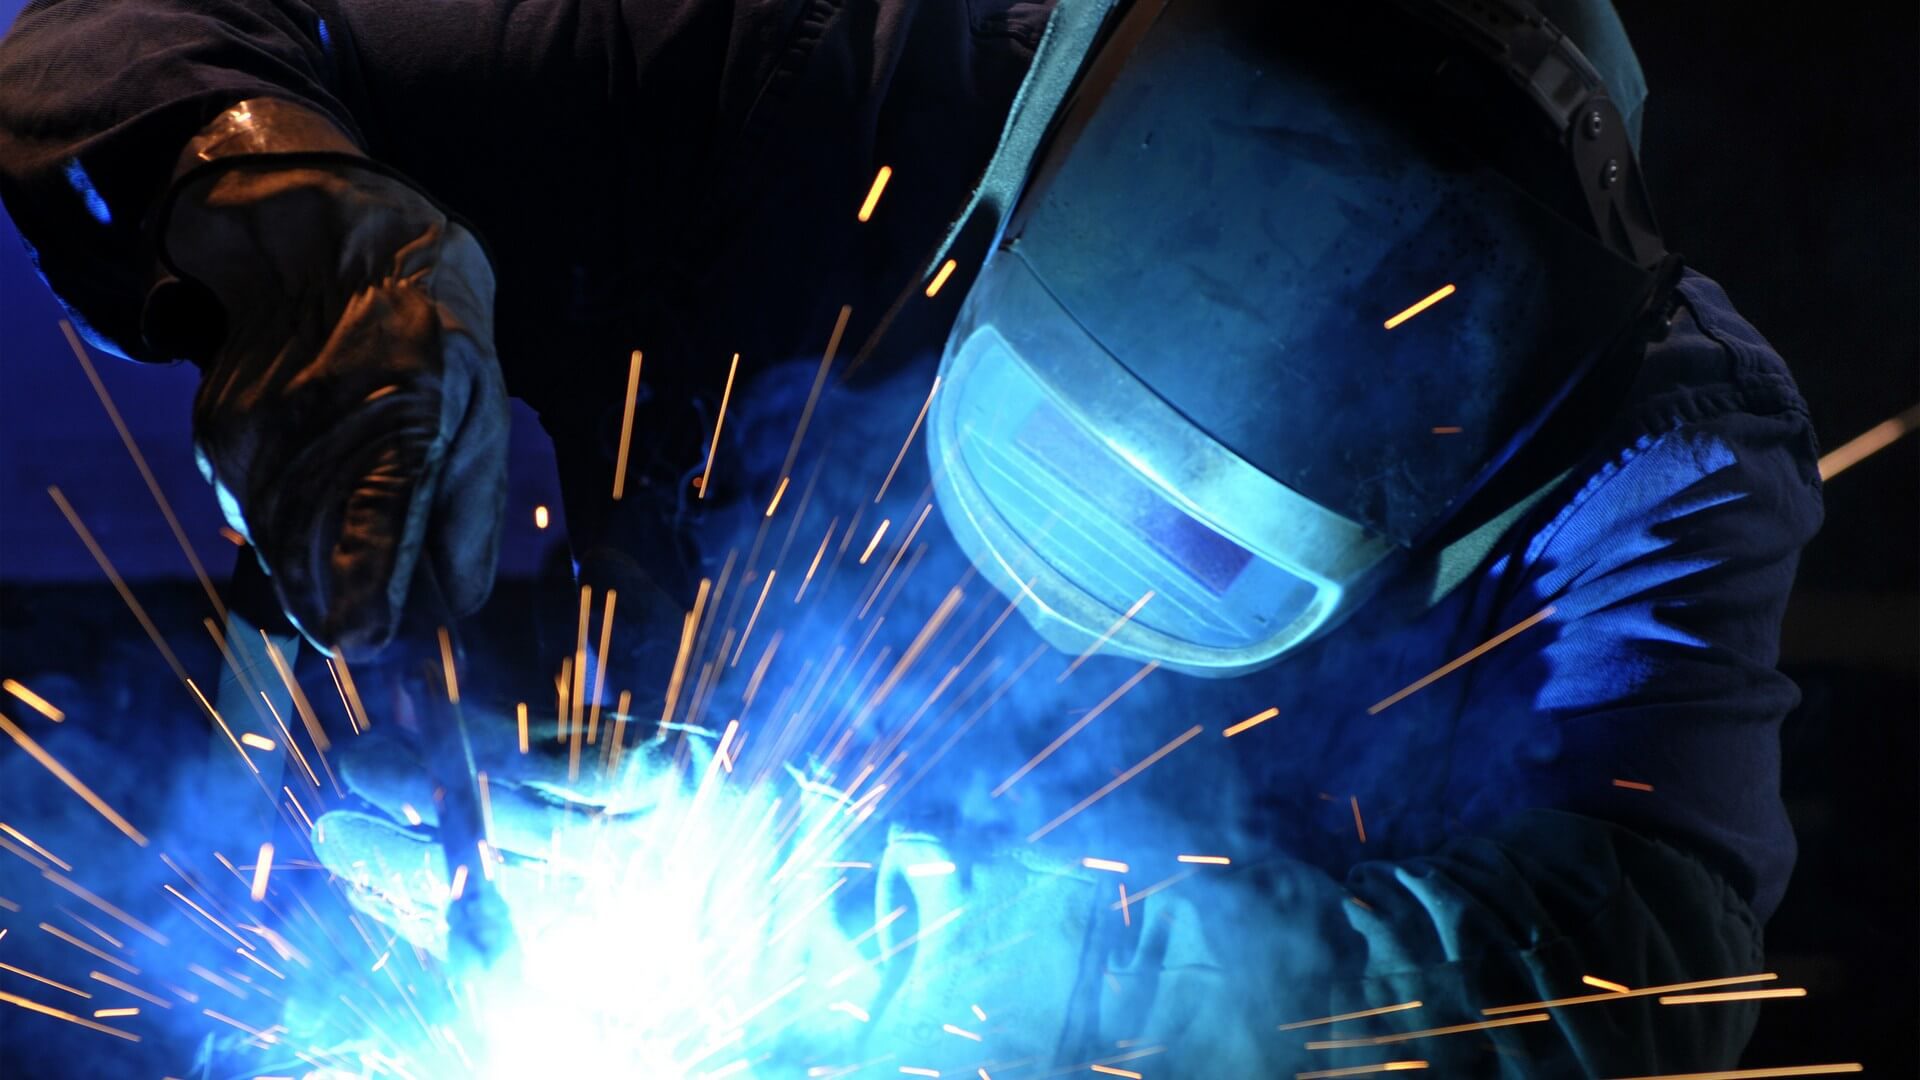 worker while doing a welding with arc welder